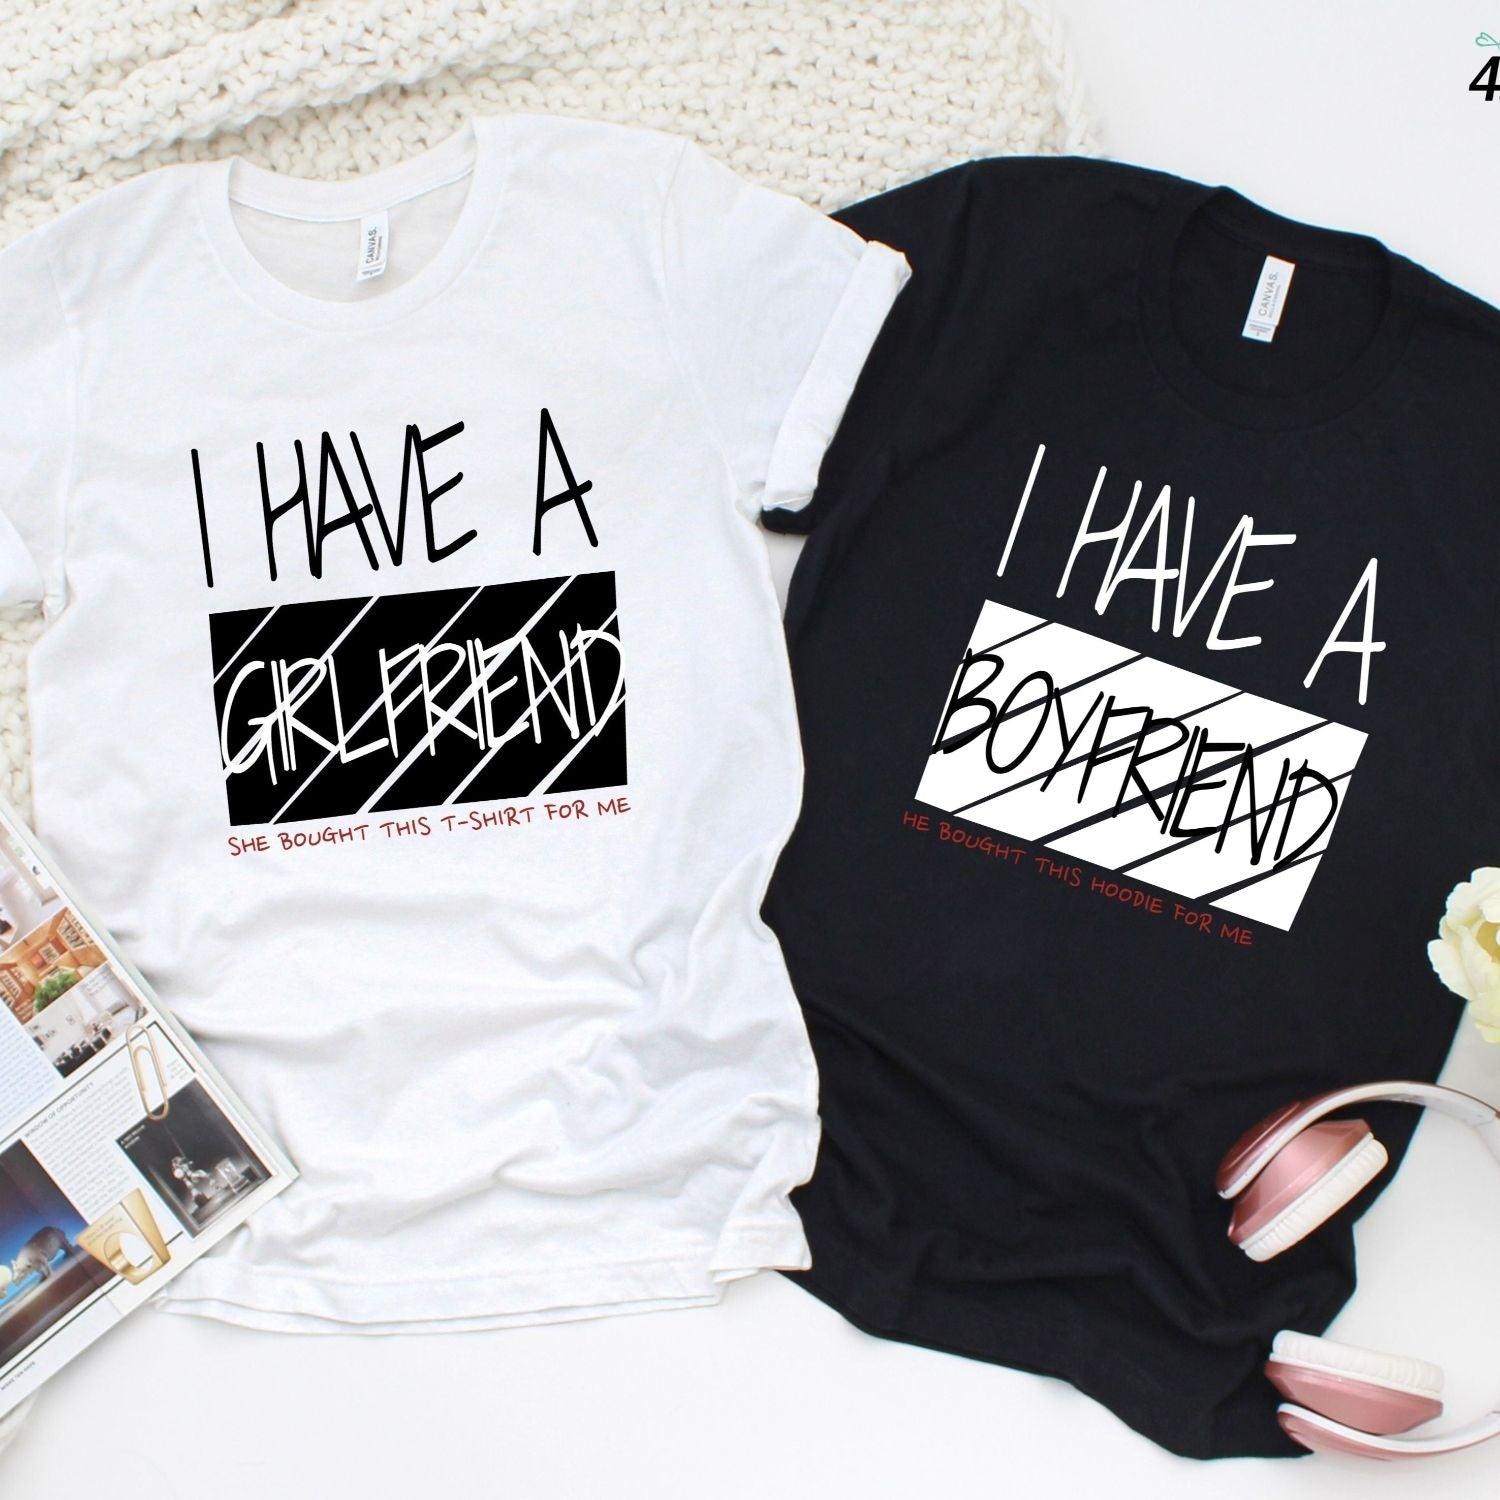 Funny Matching Set: For BF's Bday, I Have A Girlfriend/Boyfriend Outfit! - 4Lovebirds